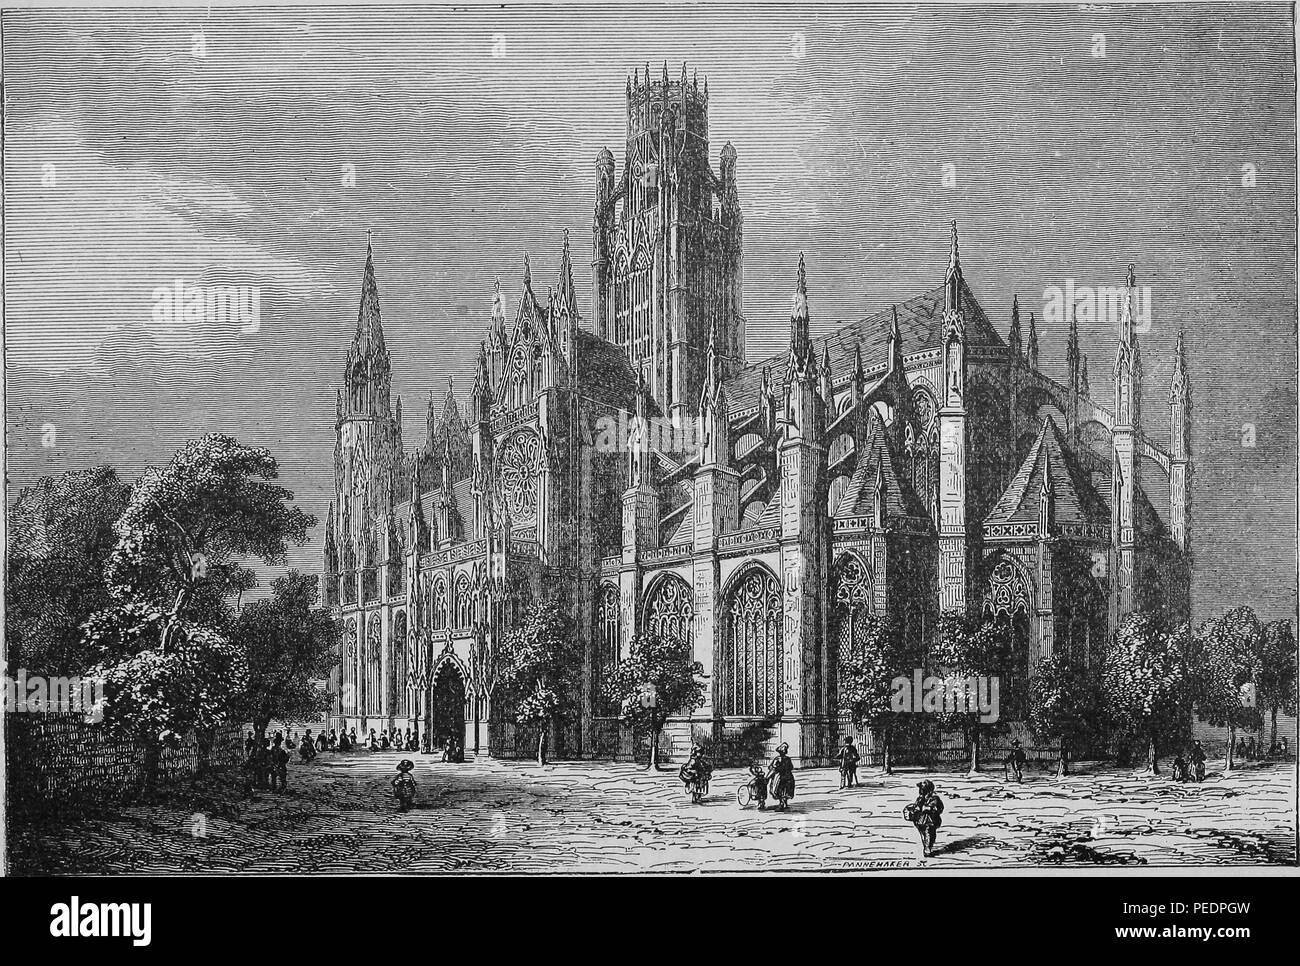 Black and white print depicting the Cathedral at Rouen, a Roman Catholic church located in Rouen, Normandy, France, built in the Gothic style with tall spires and buttress supports, published in James Luke Meagher's 'Teaching Truth by Signs and Ceremonies', 1882. Courtesy Internet Archive. Courtesy Internet Archive. () Stock Photo